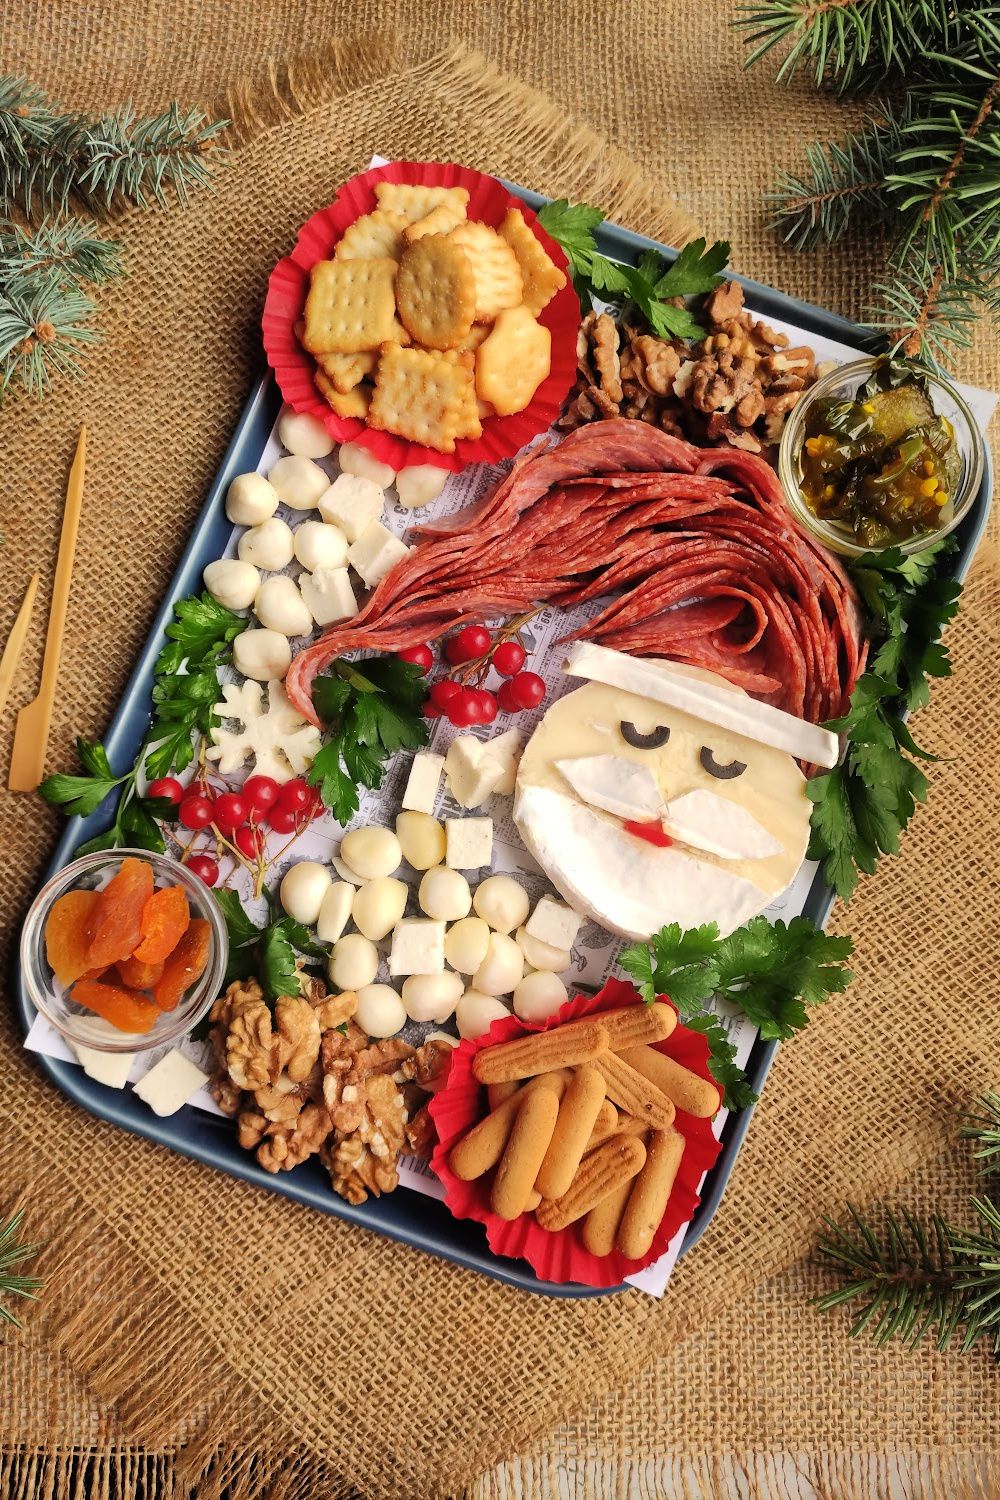 Santa Charcuterie Board. Santa is made out of brie cheese with a salami Santa hat. The Santa cheese is surrounded by other cheeses, crackers, dried fruit and nuts on a charcuterie tray.